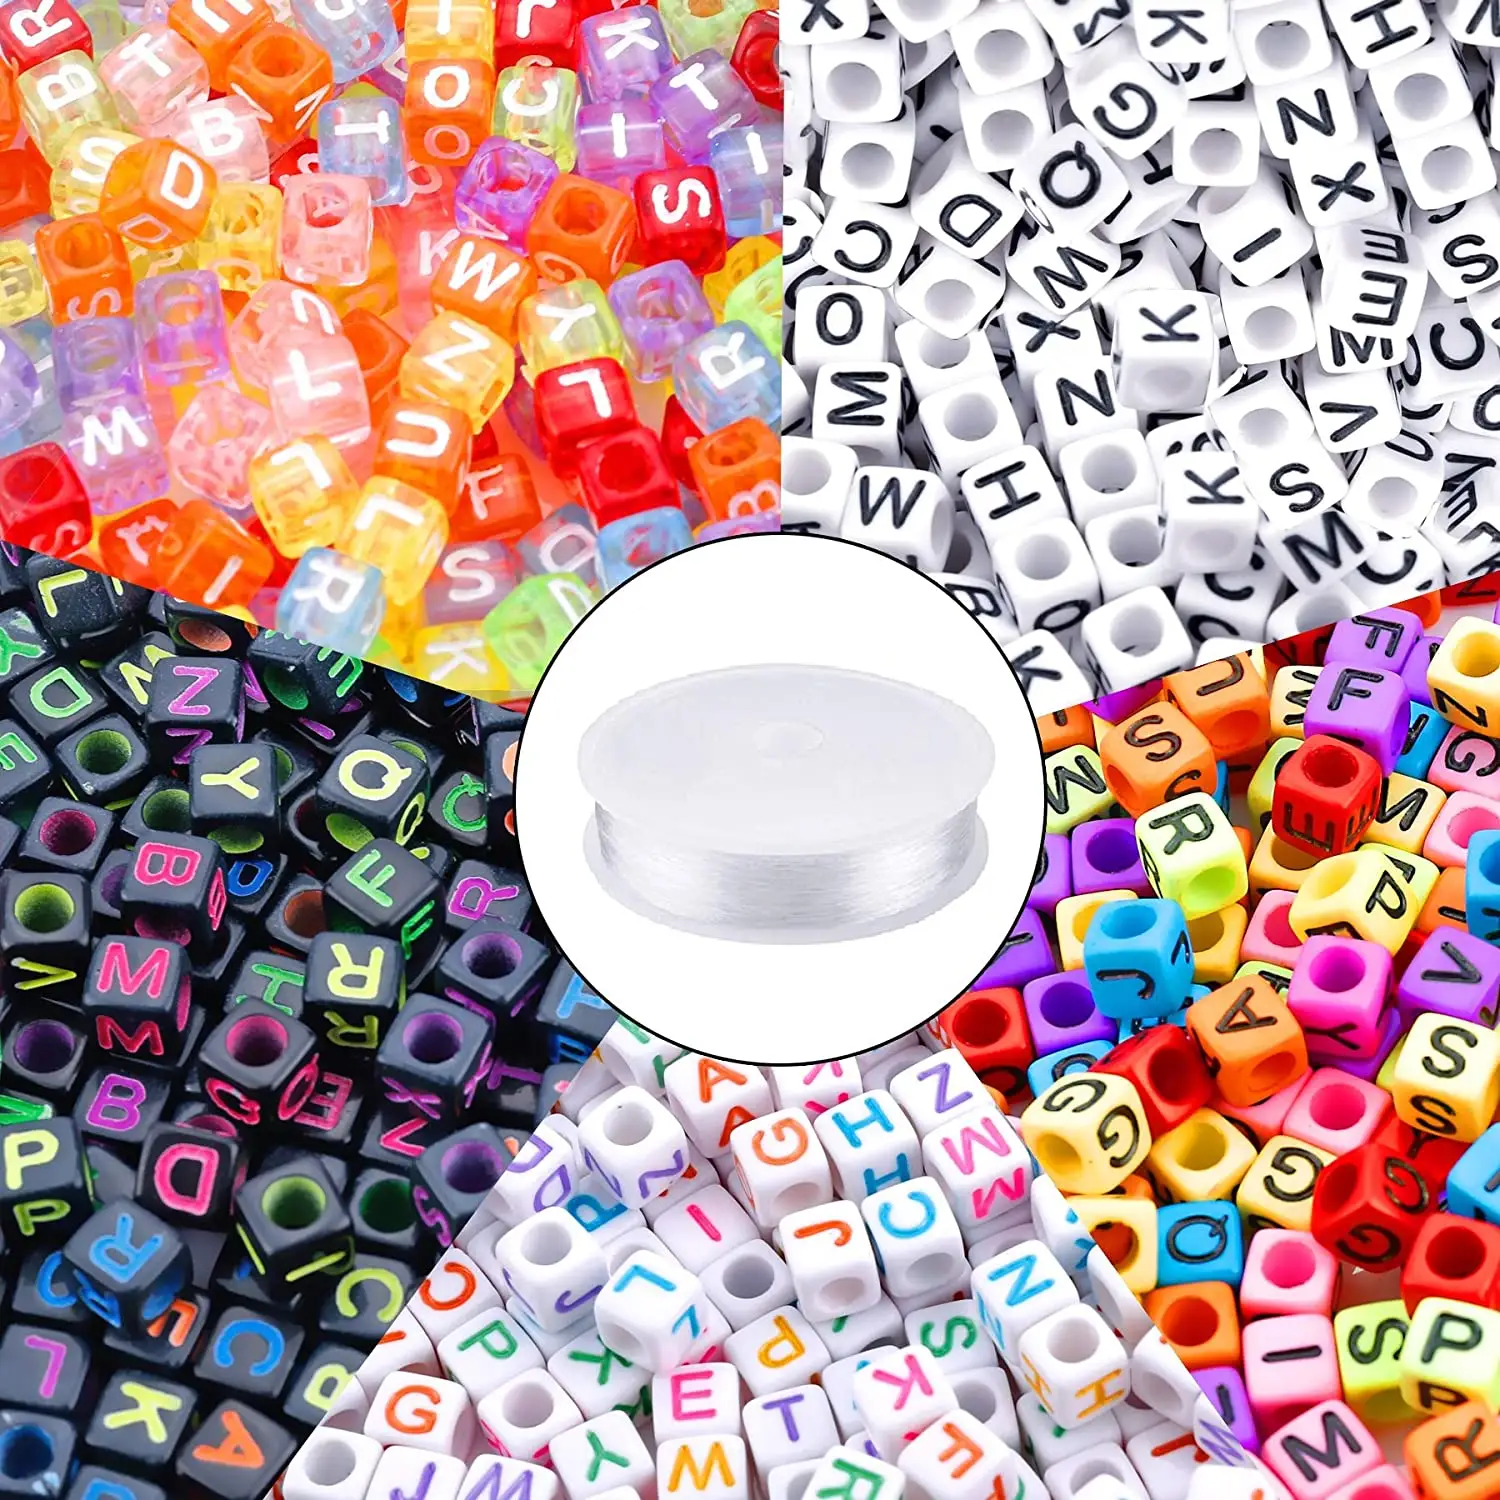 1400 Pcs 6mm Mixed Acrylic Square Alphabet Beads Loose Beads Set for Jewelry Making